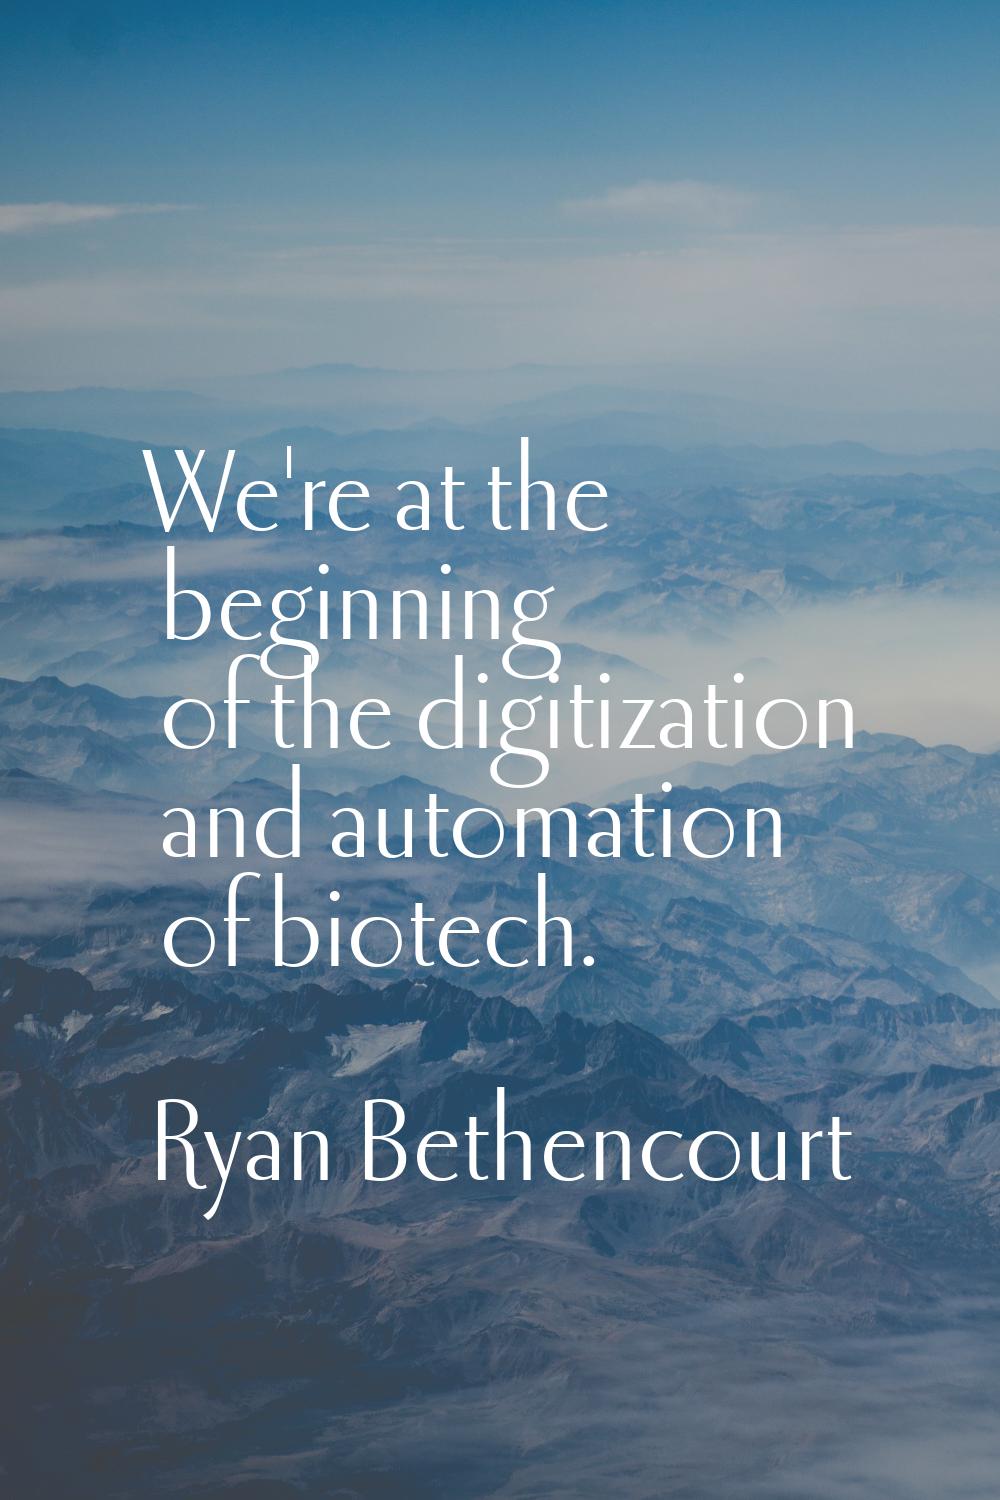 We're at the beginning of the digitization and automation of biotech.